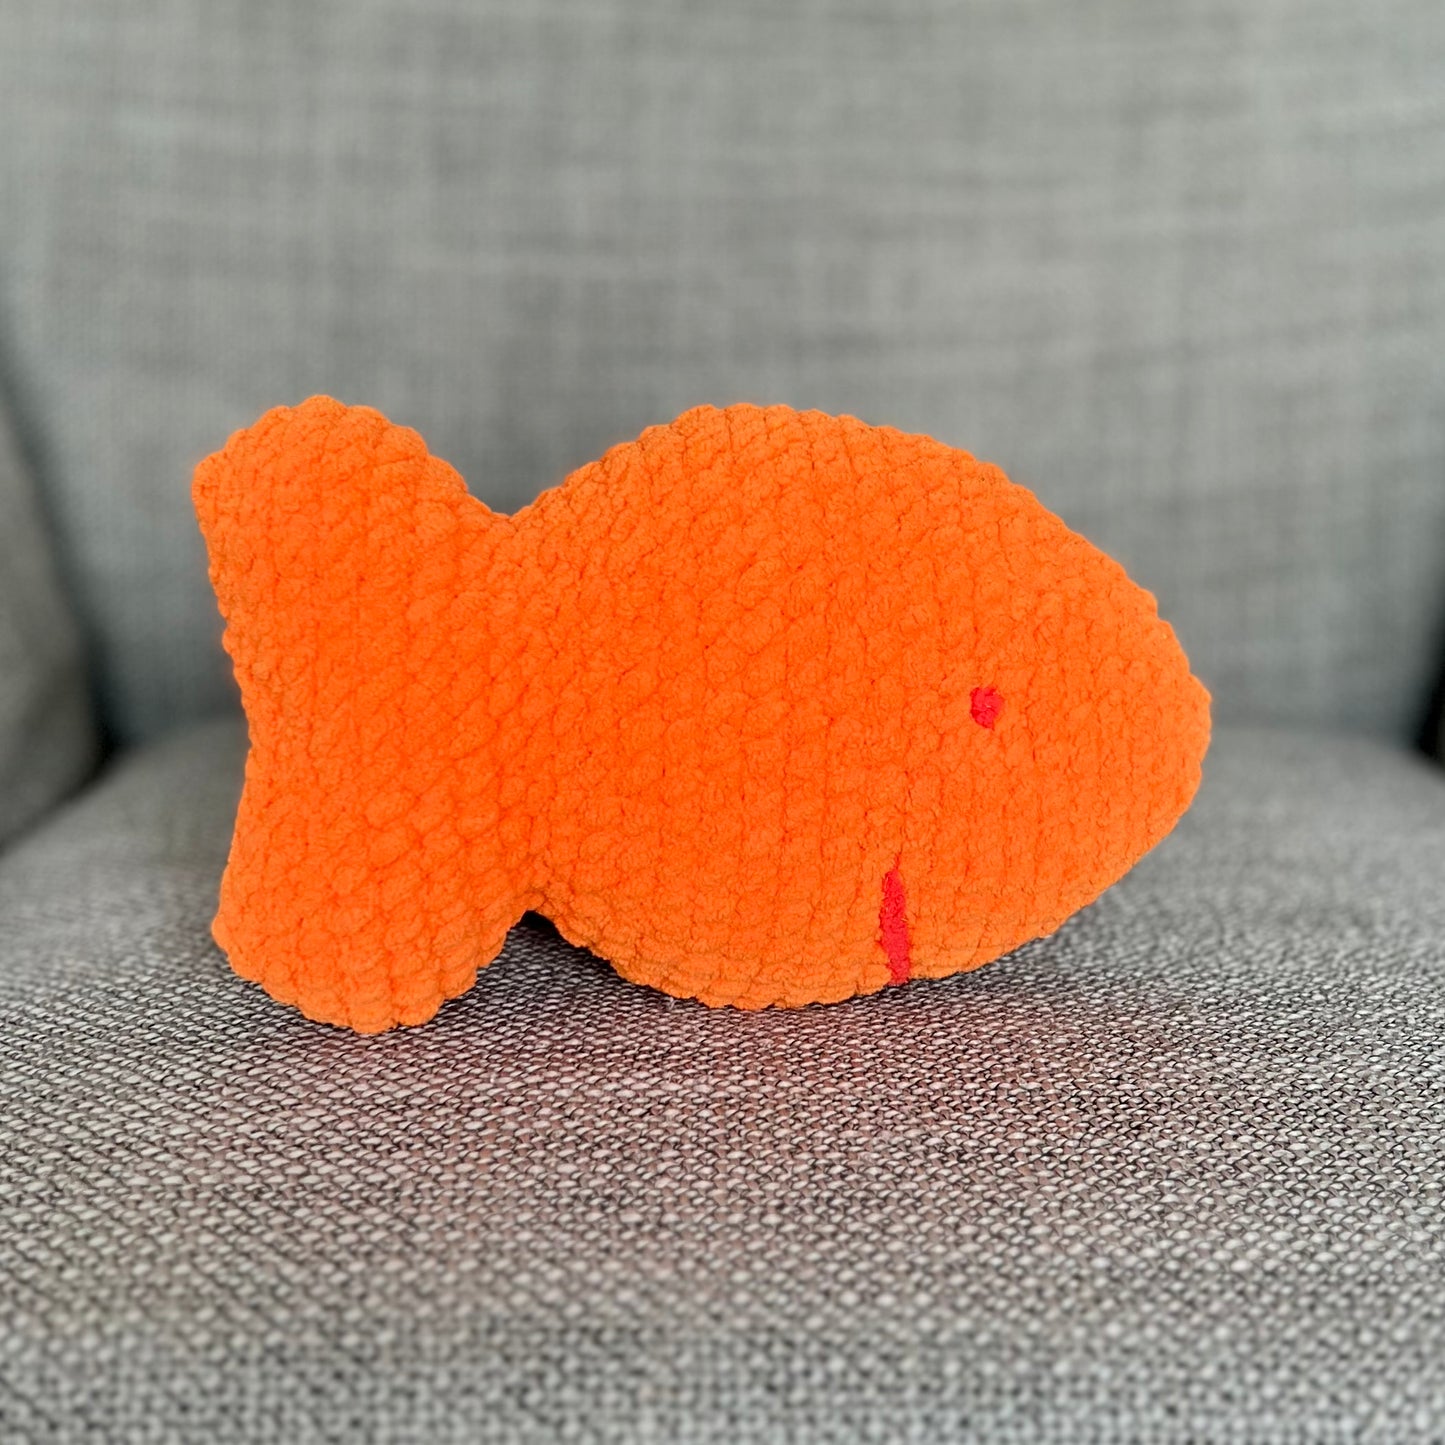 Colorful Fish Crackers Crochet Pattern